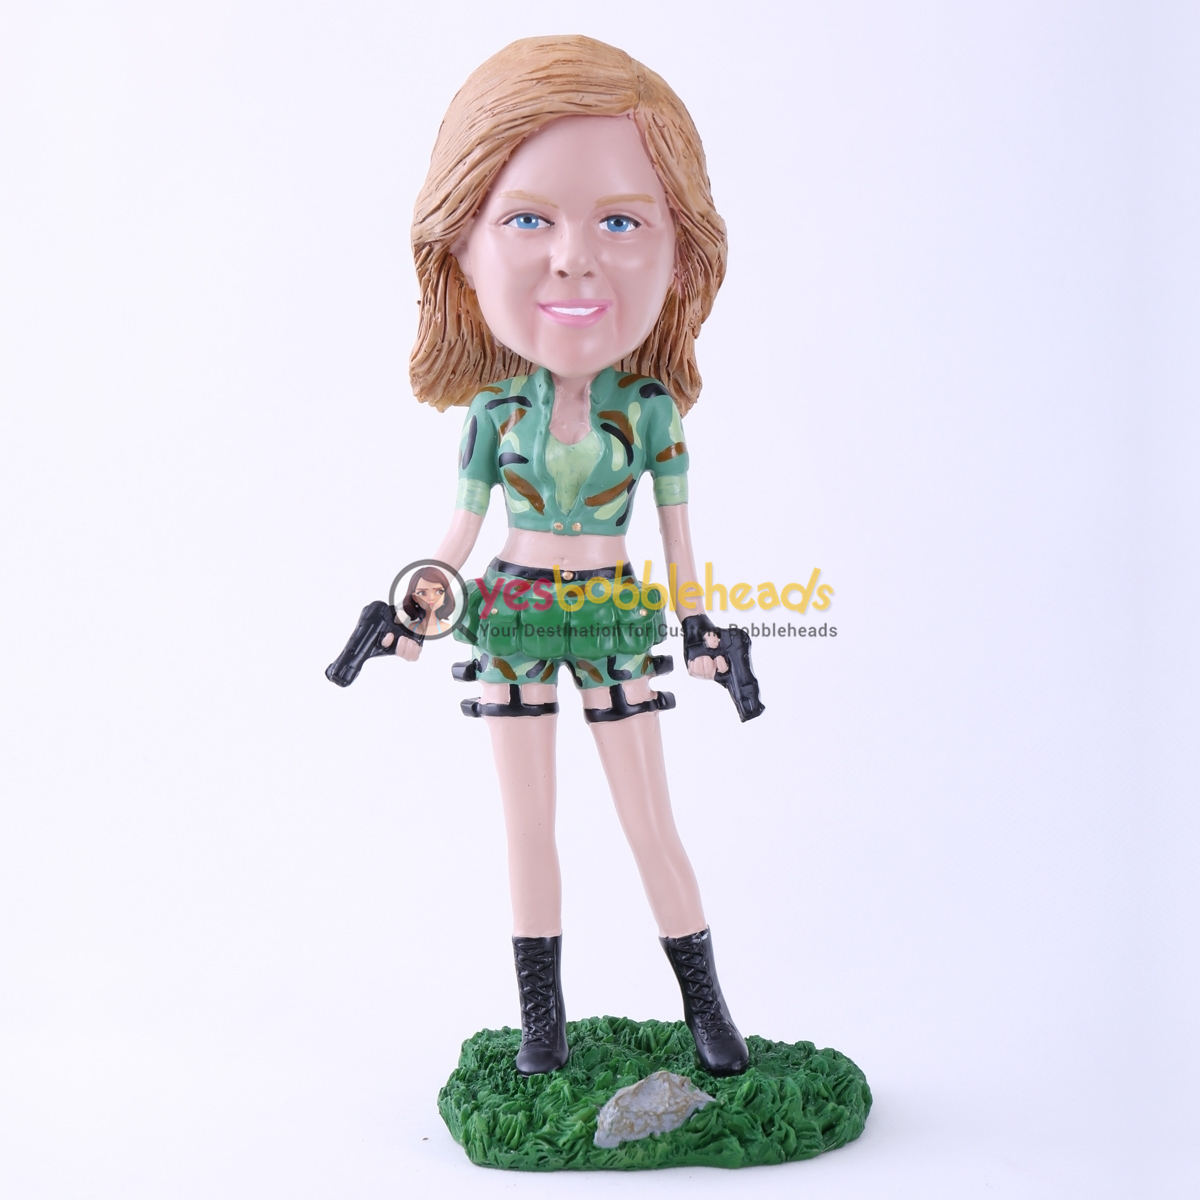 portrait of the action figure of a female soldier